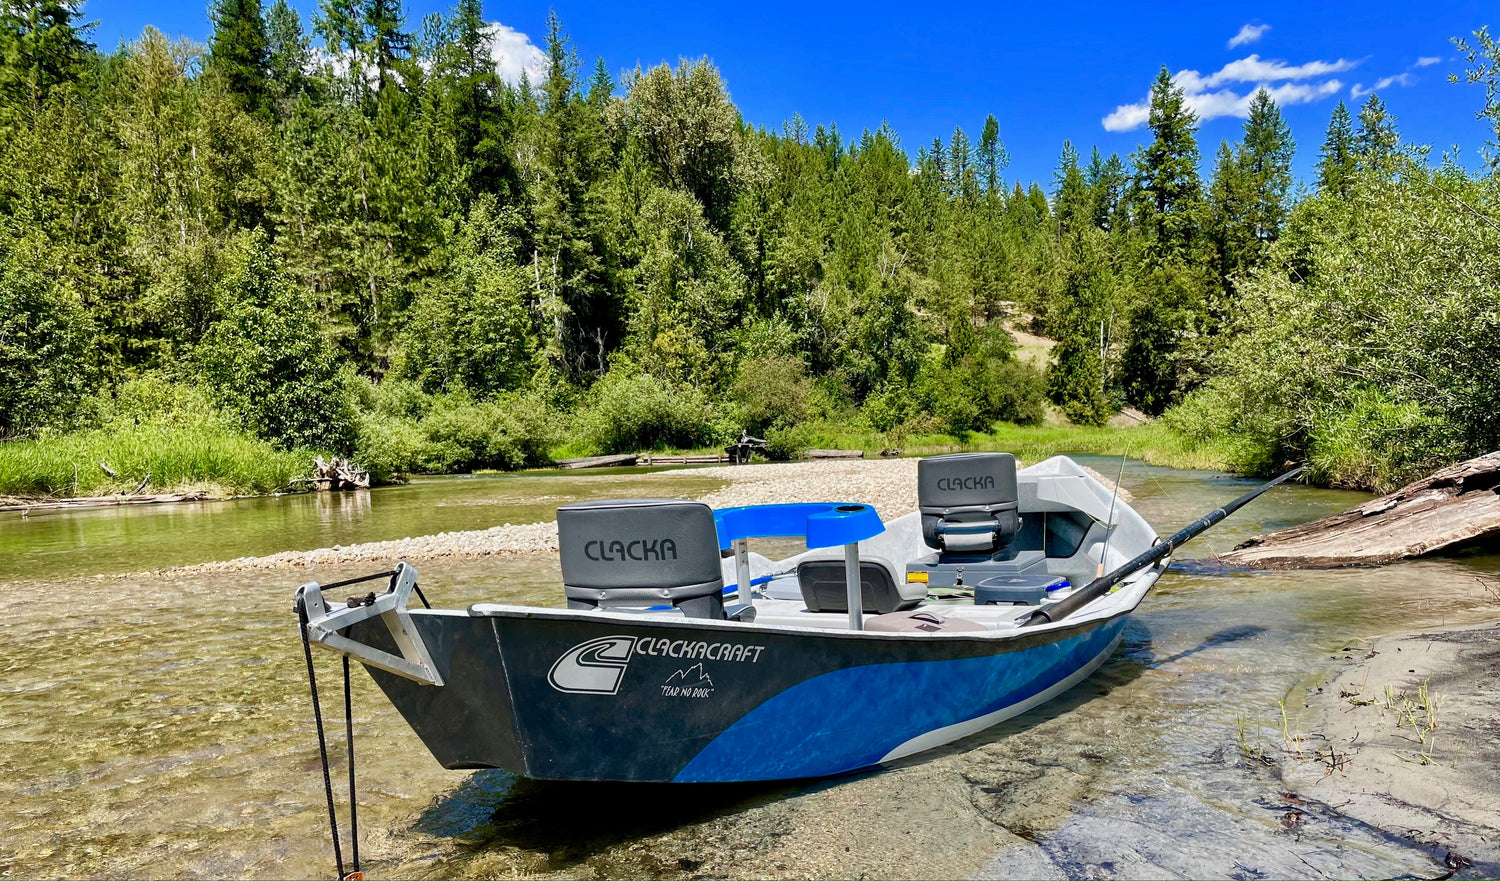 GUIDED DRIFT BOAT TRIPS ON THE SLOCAN RIVER